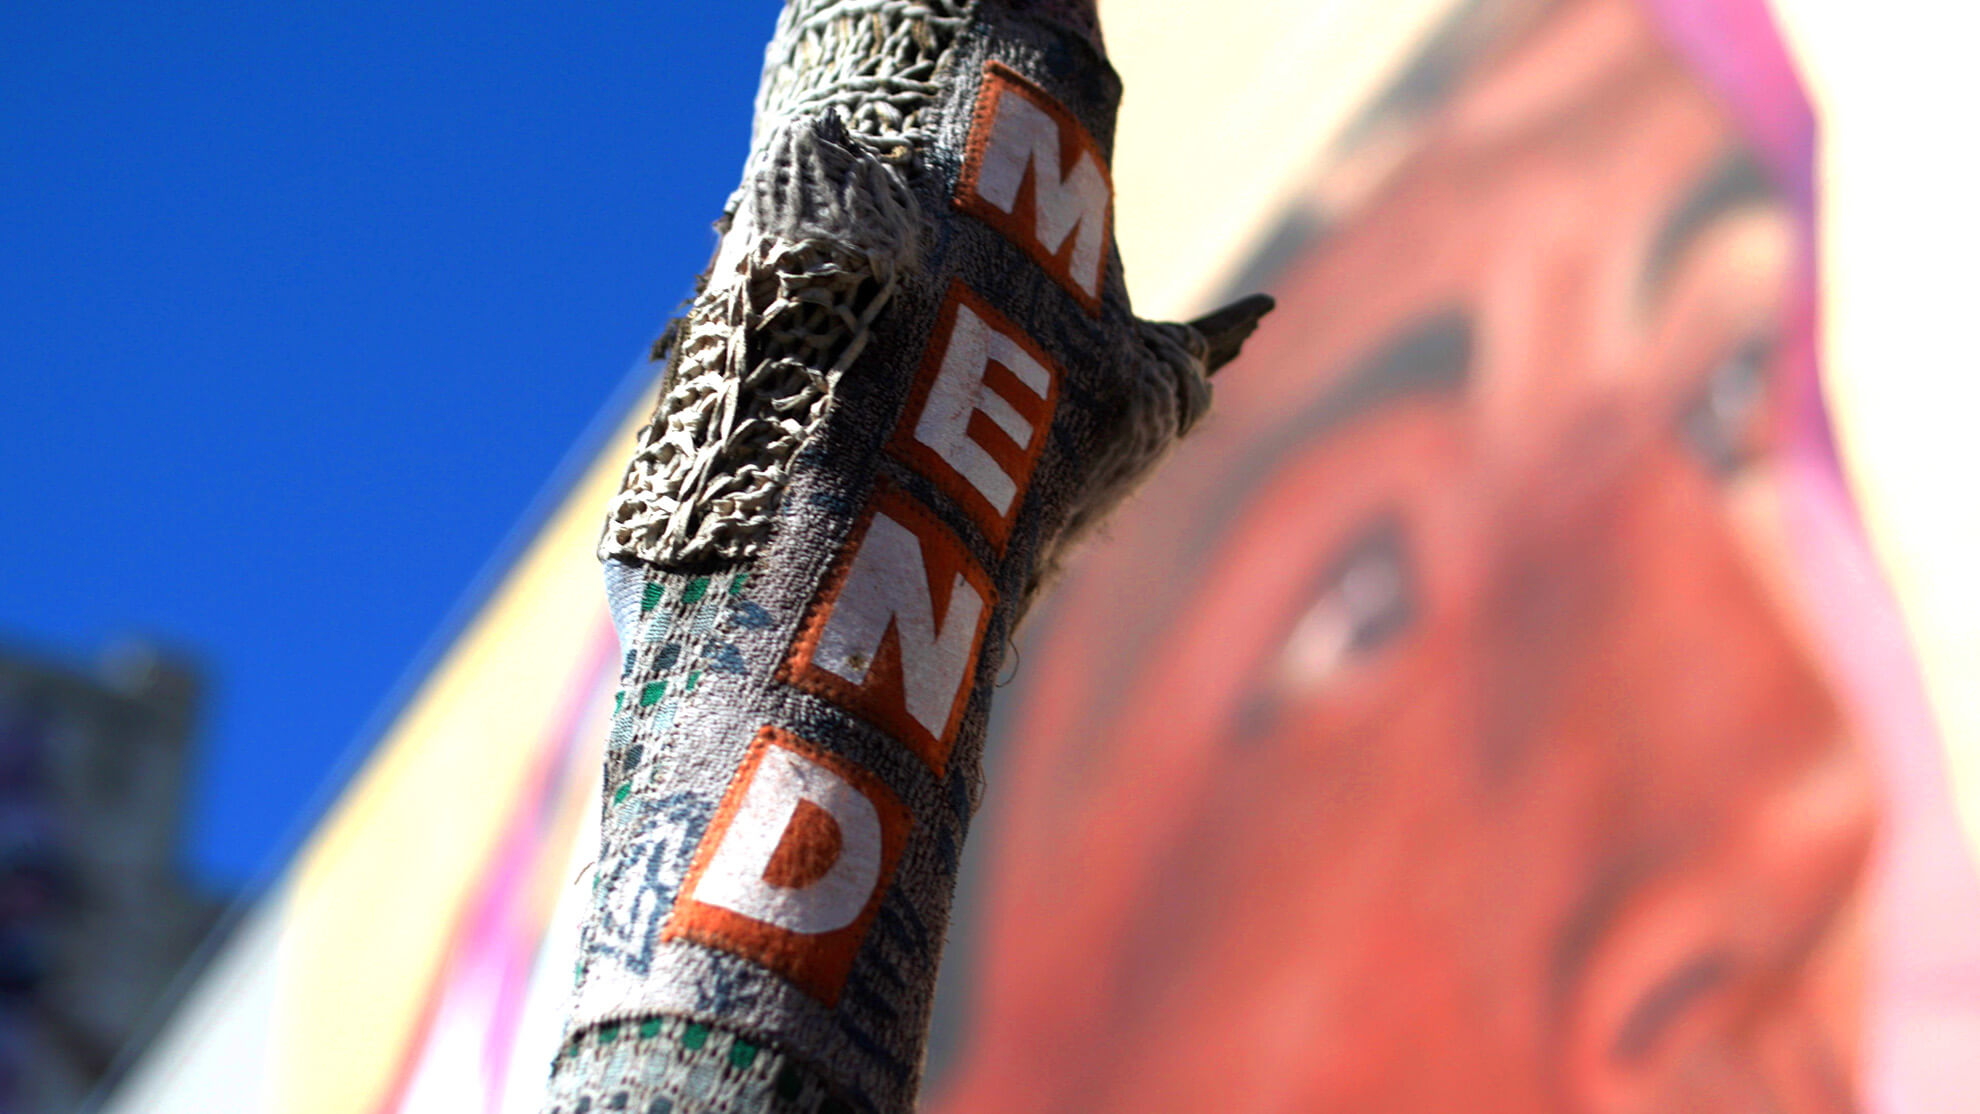 An extreme close-up of a tree with fabric art wrapped around it. The art reads "MEND", vertically, in bright white letters on an orange background. Part of the mural can be seen in the background, just out of focus.